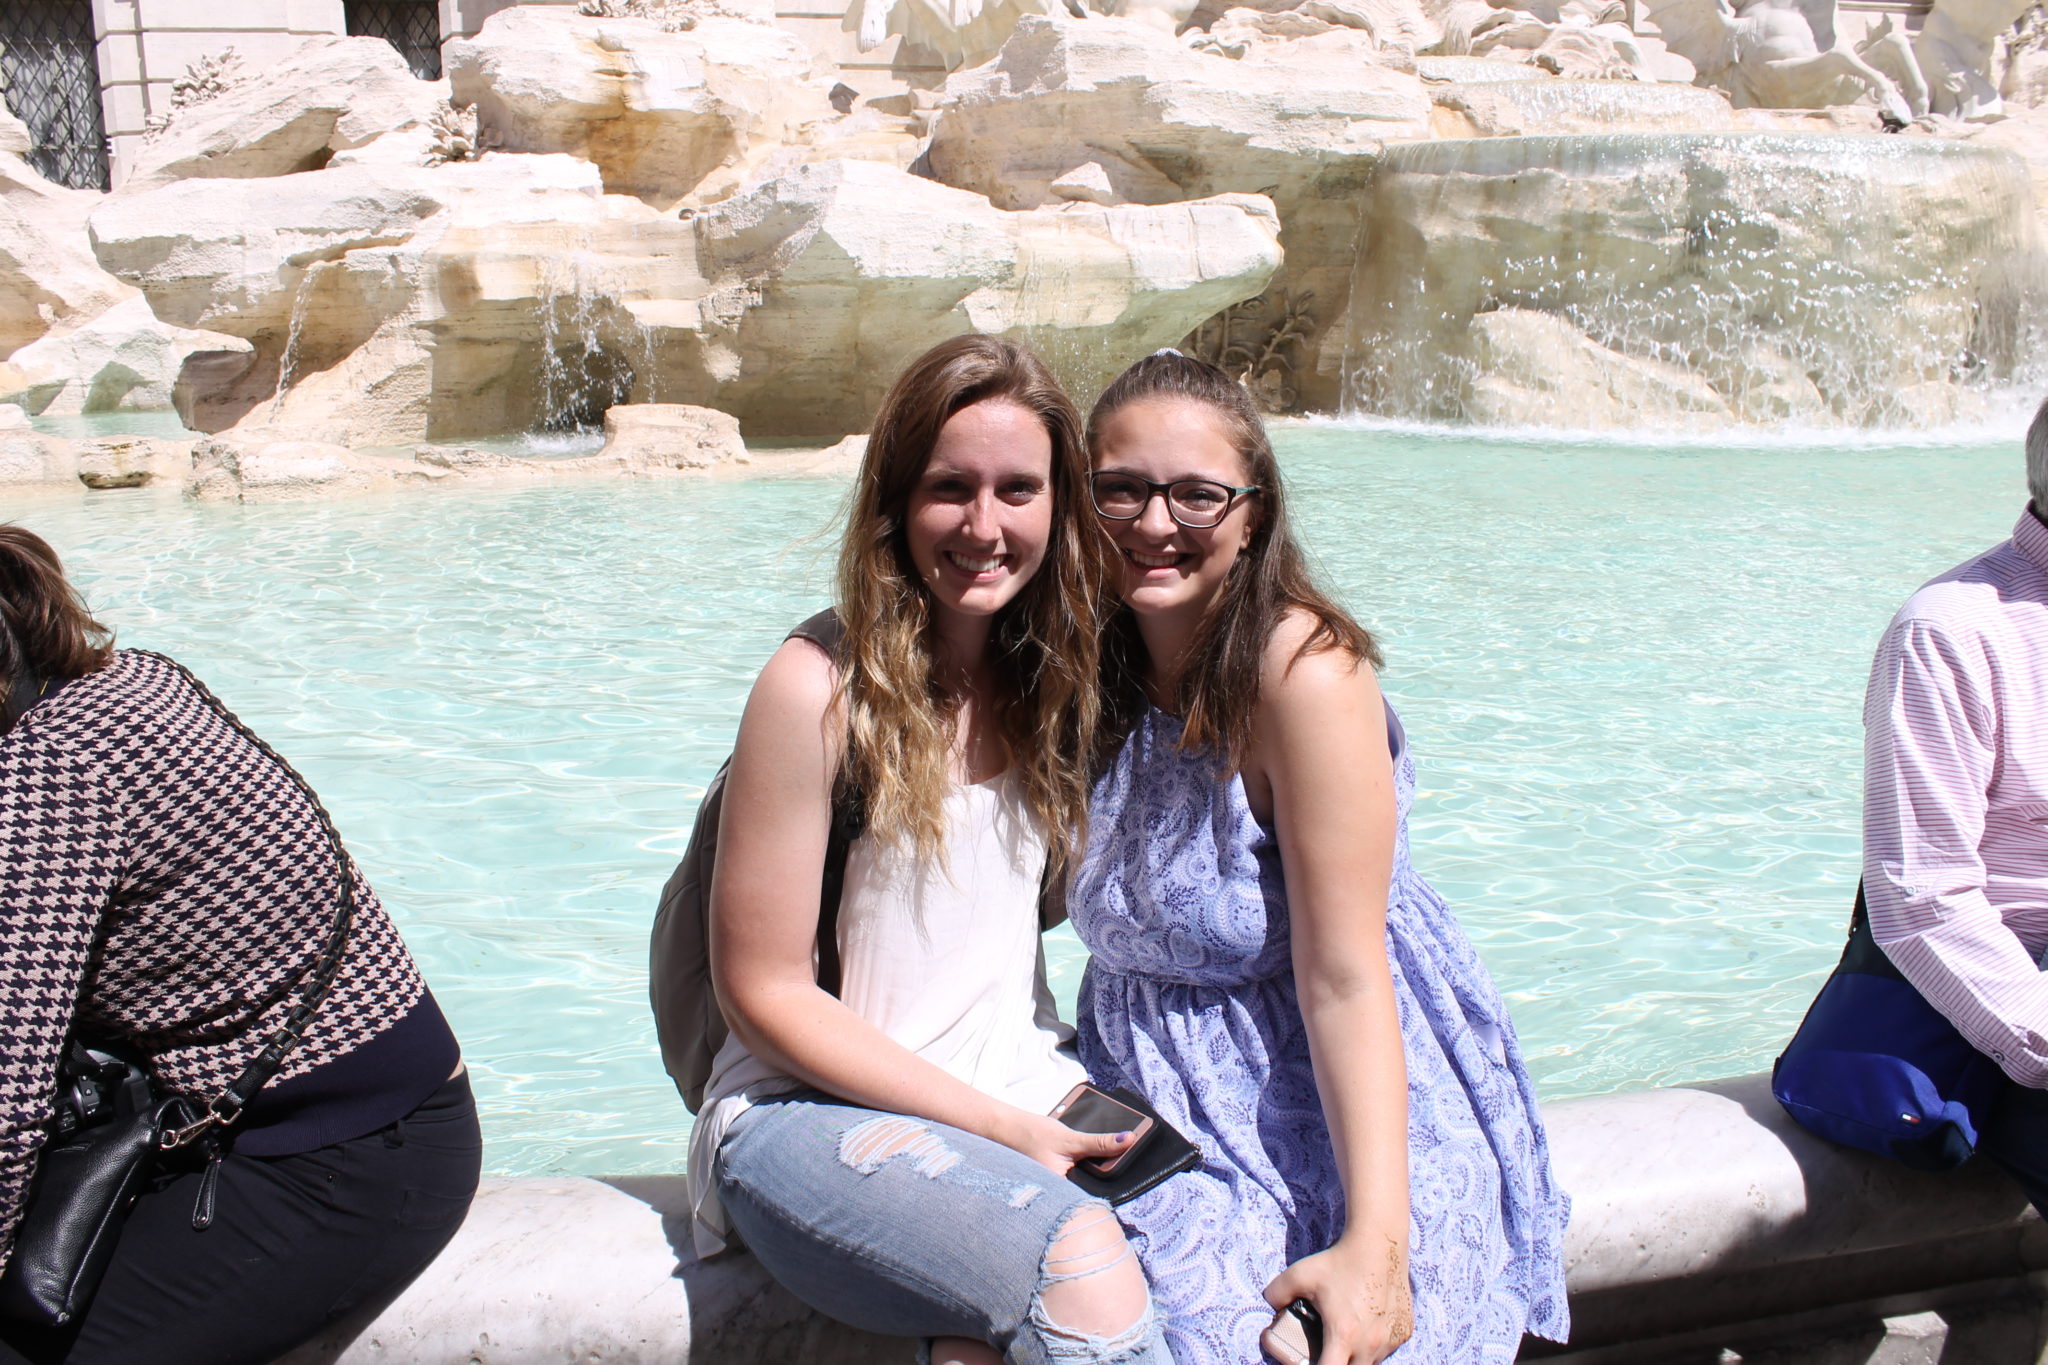 AIFS students at the Trevi Fountain in Rome, Italy